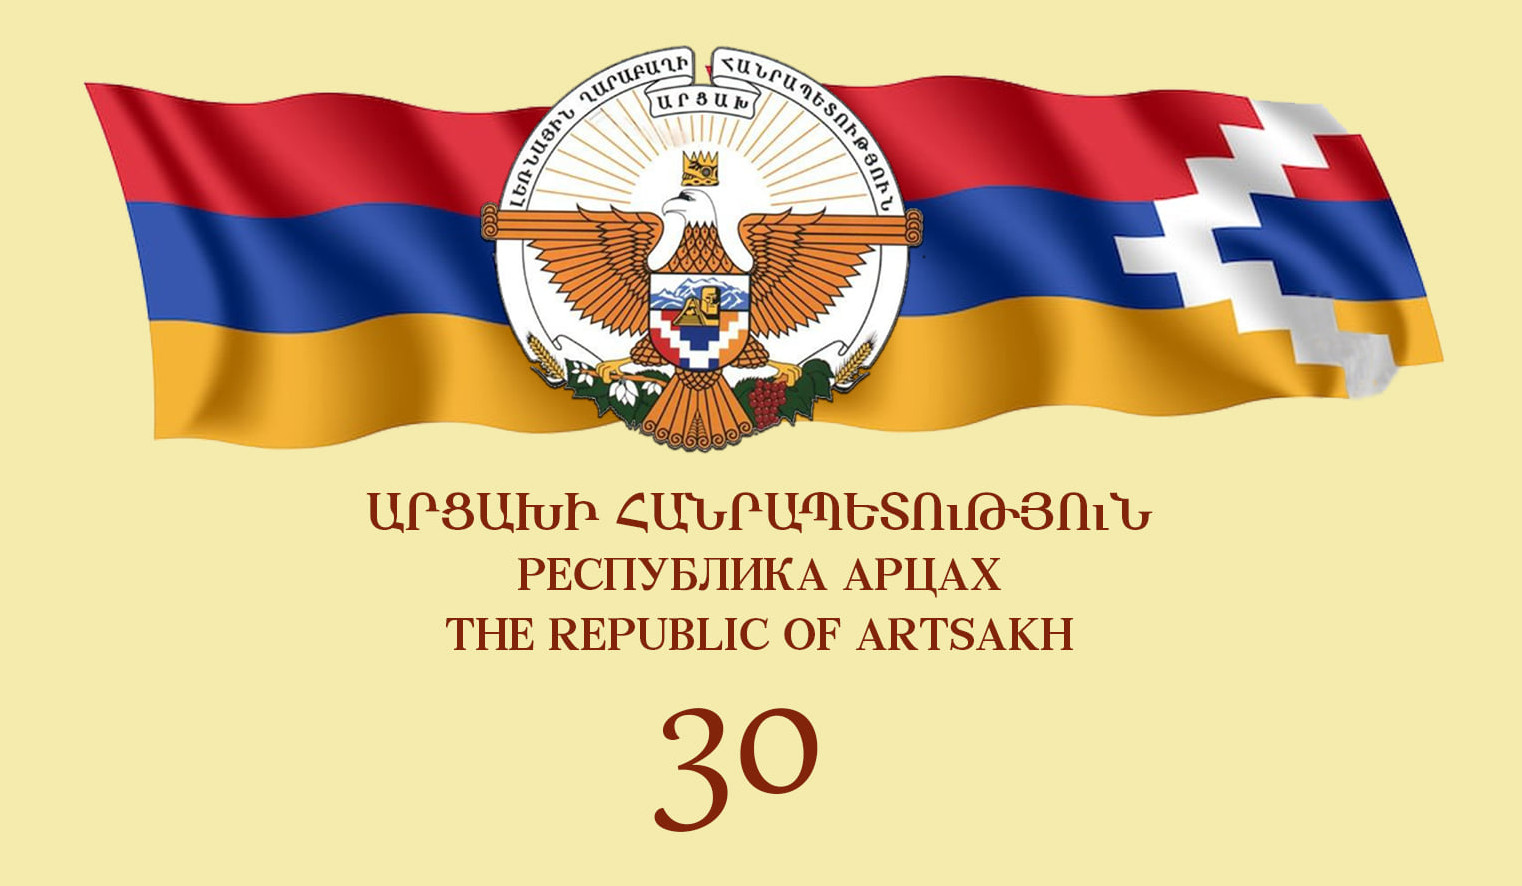 Adoption of 2 September 1991 declaration on proclamation of republic became one of key milestones in struggle for national liberation of Armenians of Artsakh: Ministry of Foreign Affairs of Artsakh